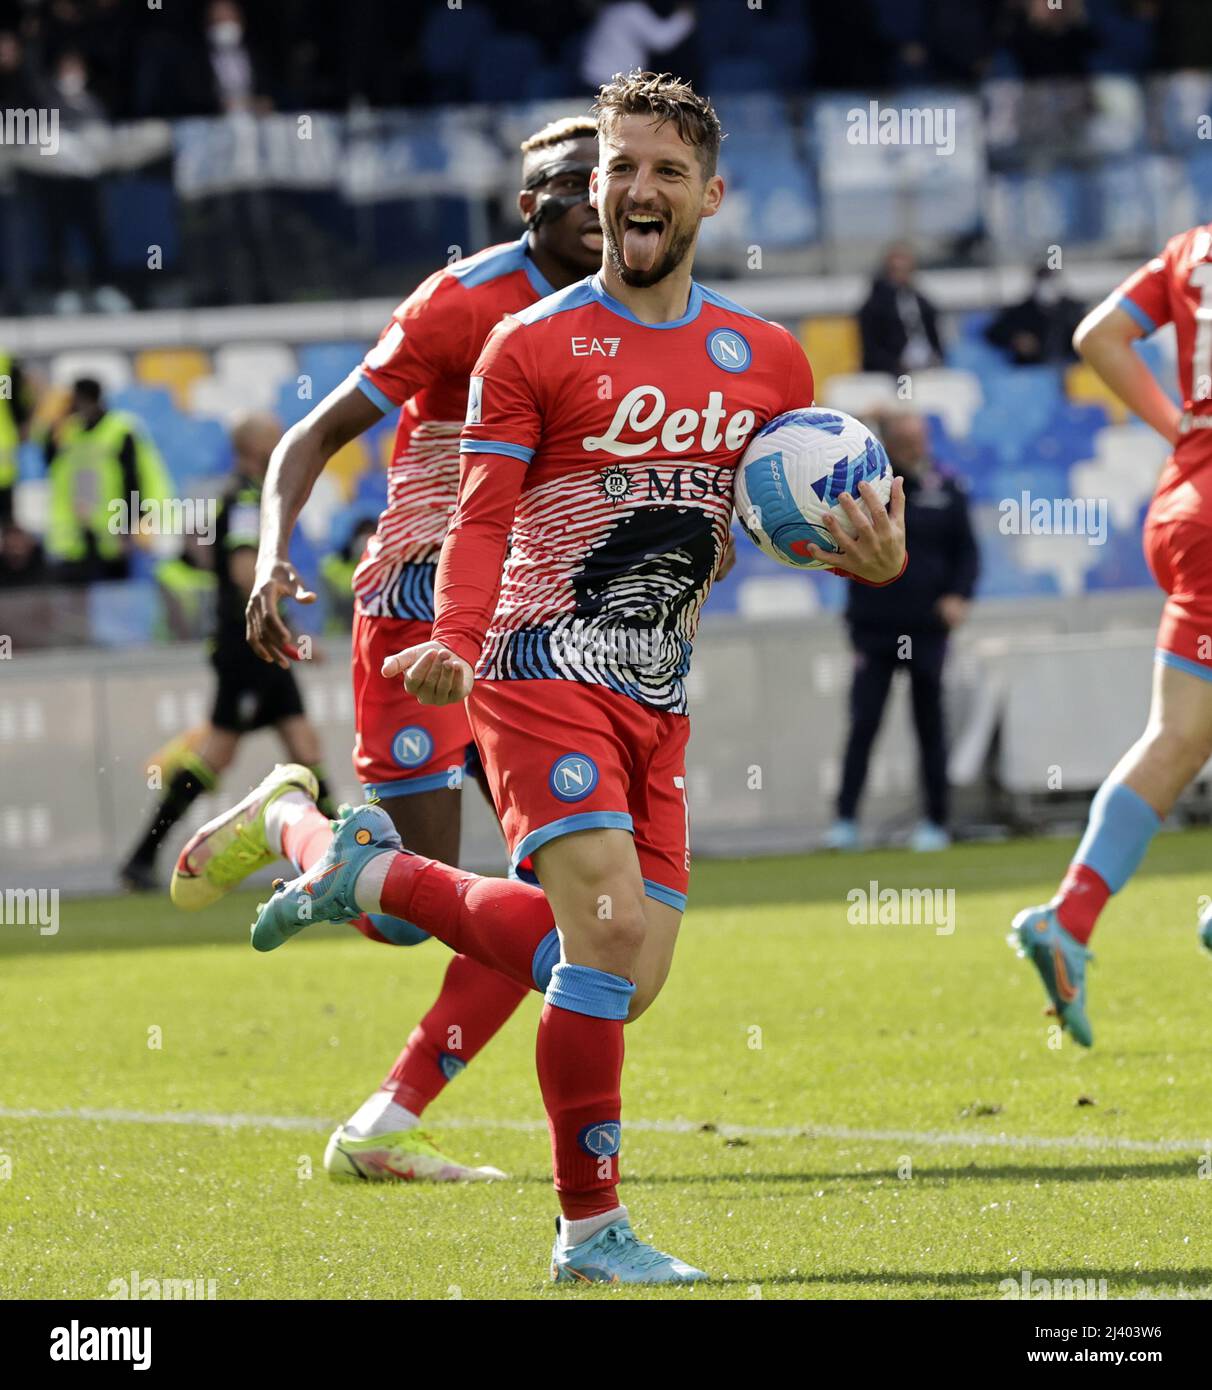 Naples, Italy. 10th Apr, 2022. Napoli's Dries Mertens celebrates his goal  during a Serie A football match between Napoli and Fiorentina in Naples,  Italy, on April 10, 2022. Credit: Str/Xinhua/Alamy Live News